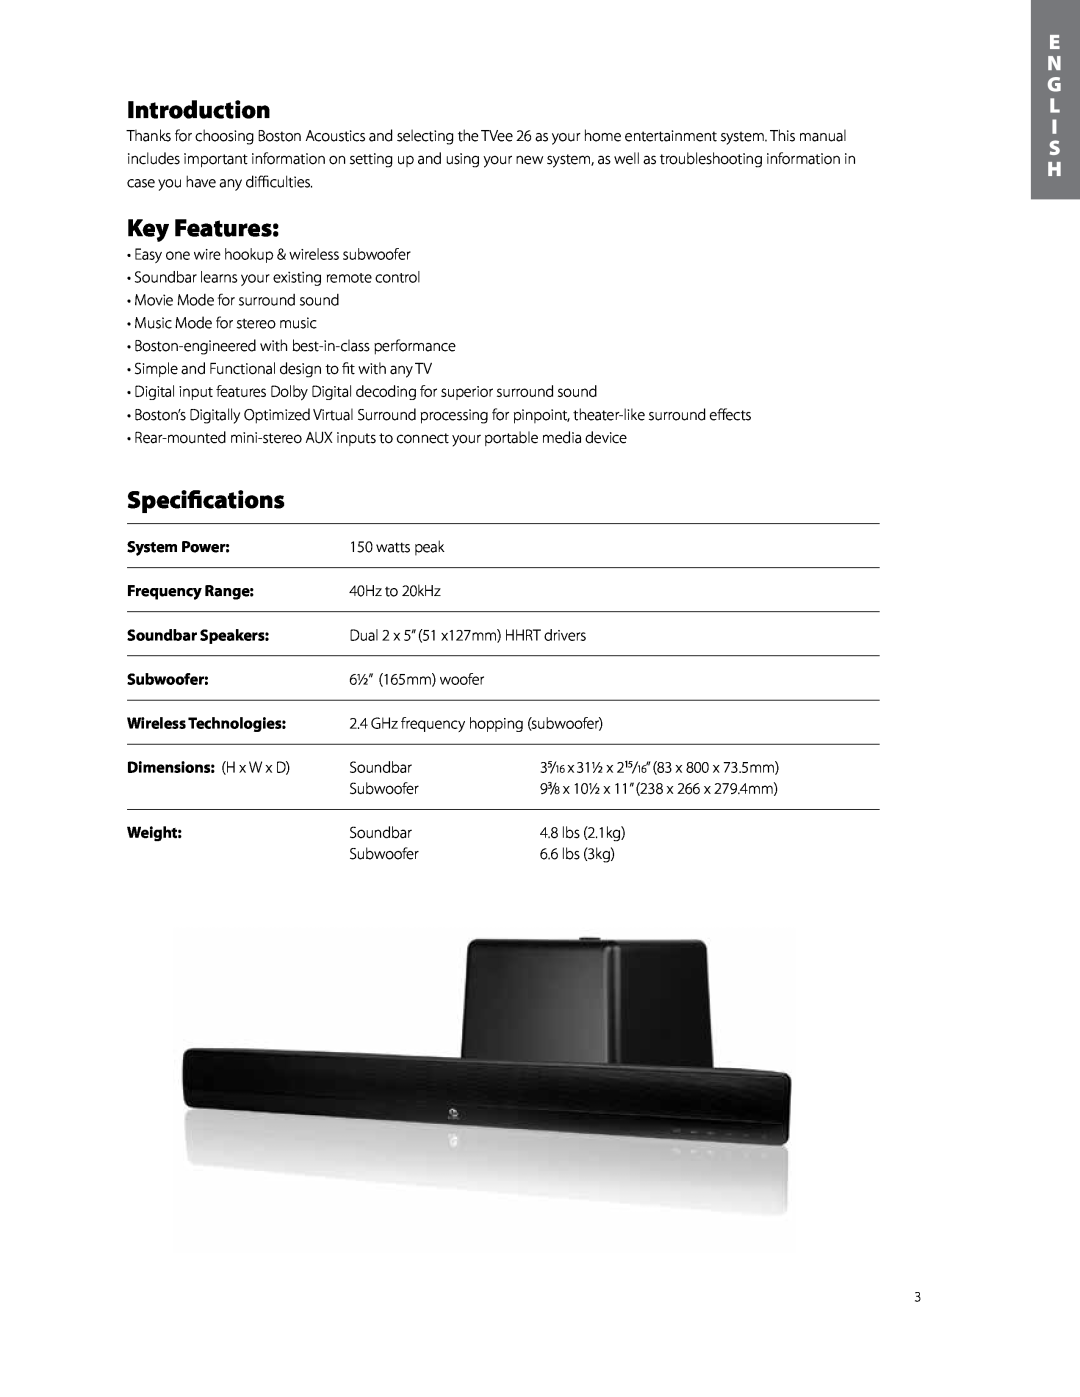 Boston Acoustics TVEEM26B Introduction, Key Features, Specifications, E N G L I S H, System Power, Frequency Range, Weight 